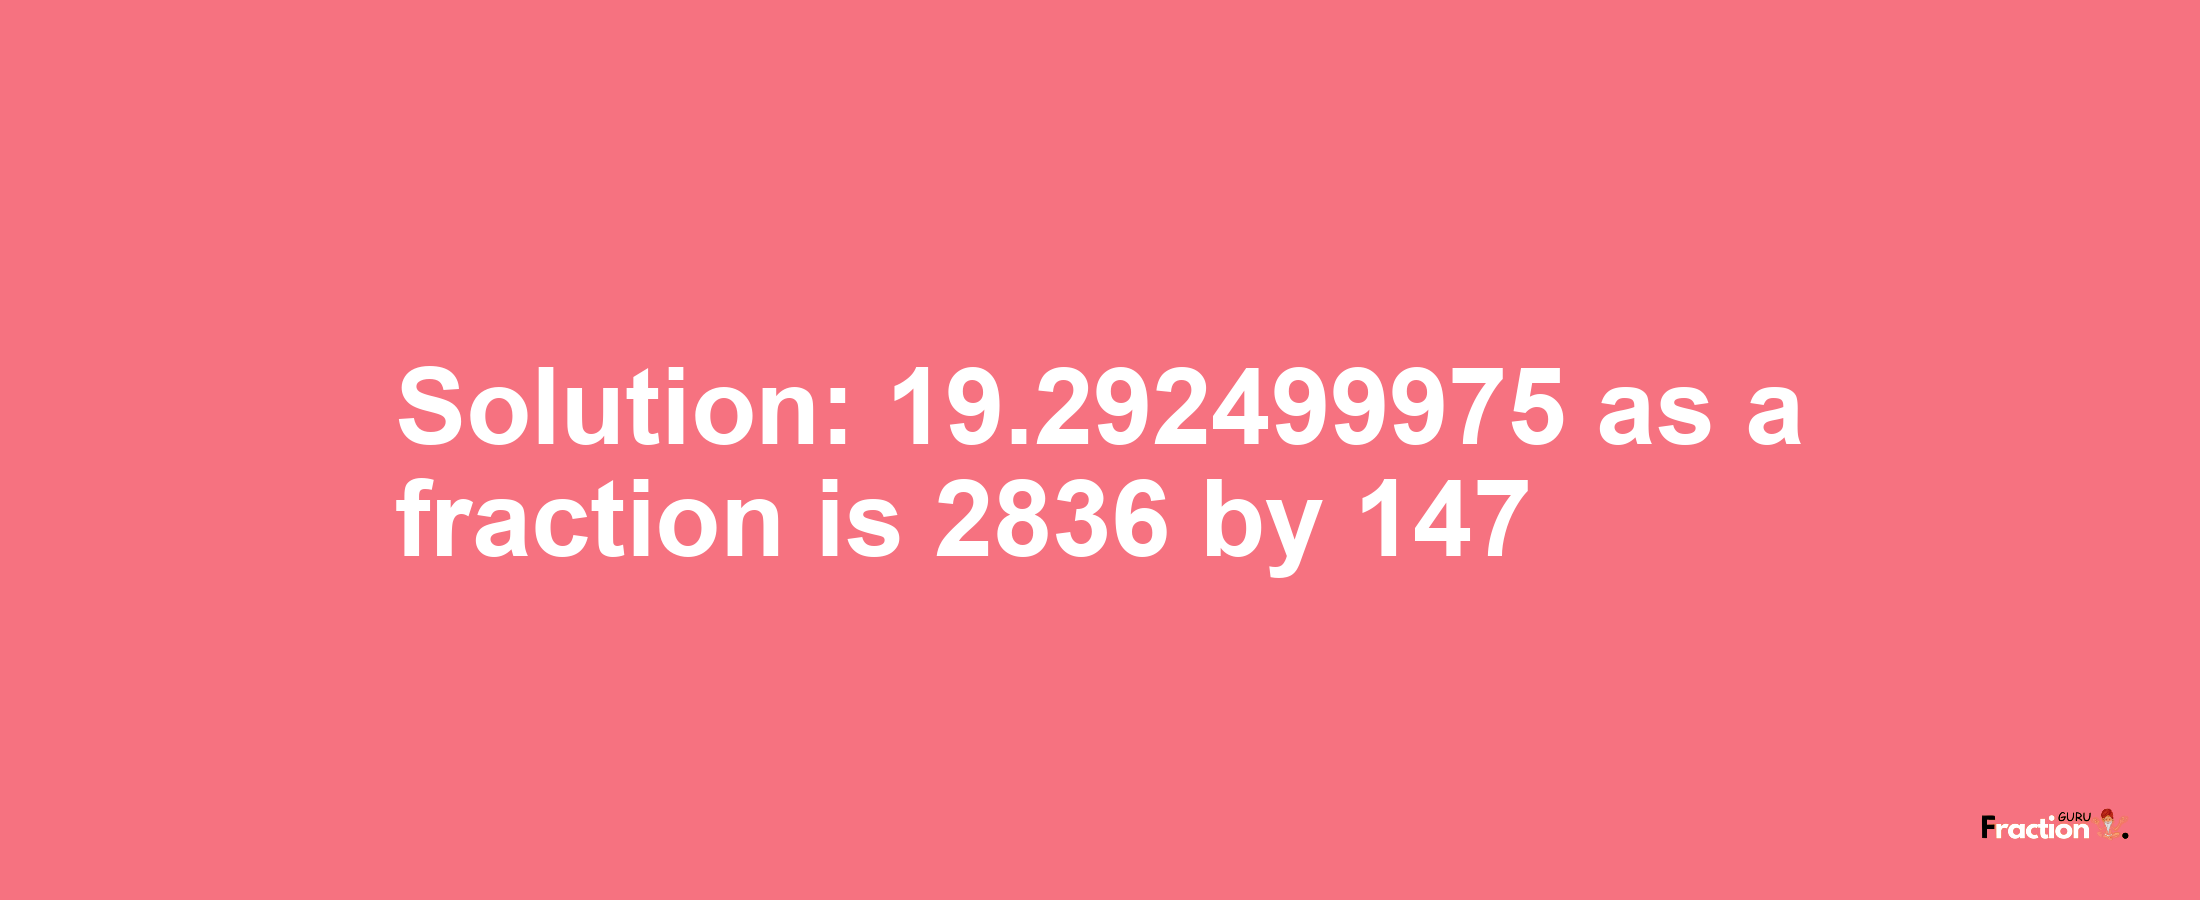 Solution:19.292499975 as a fraction is 2836/147